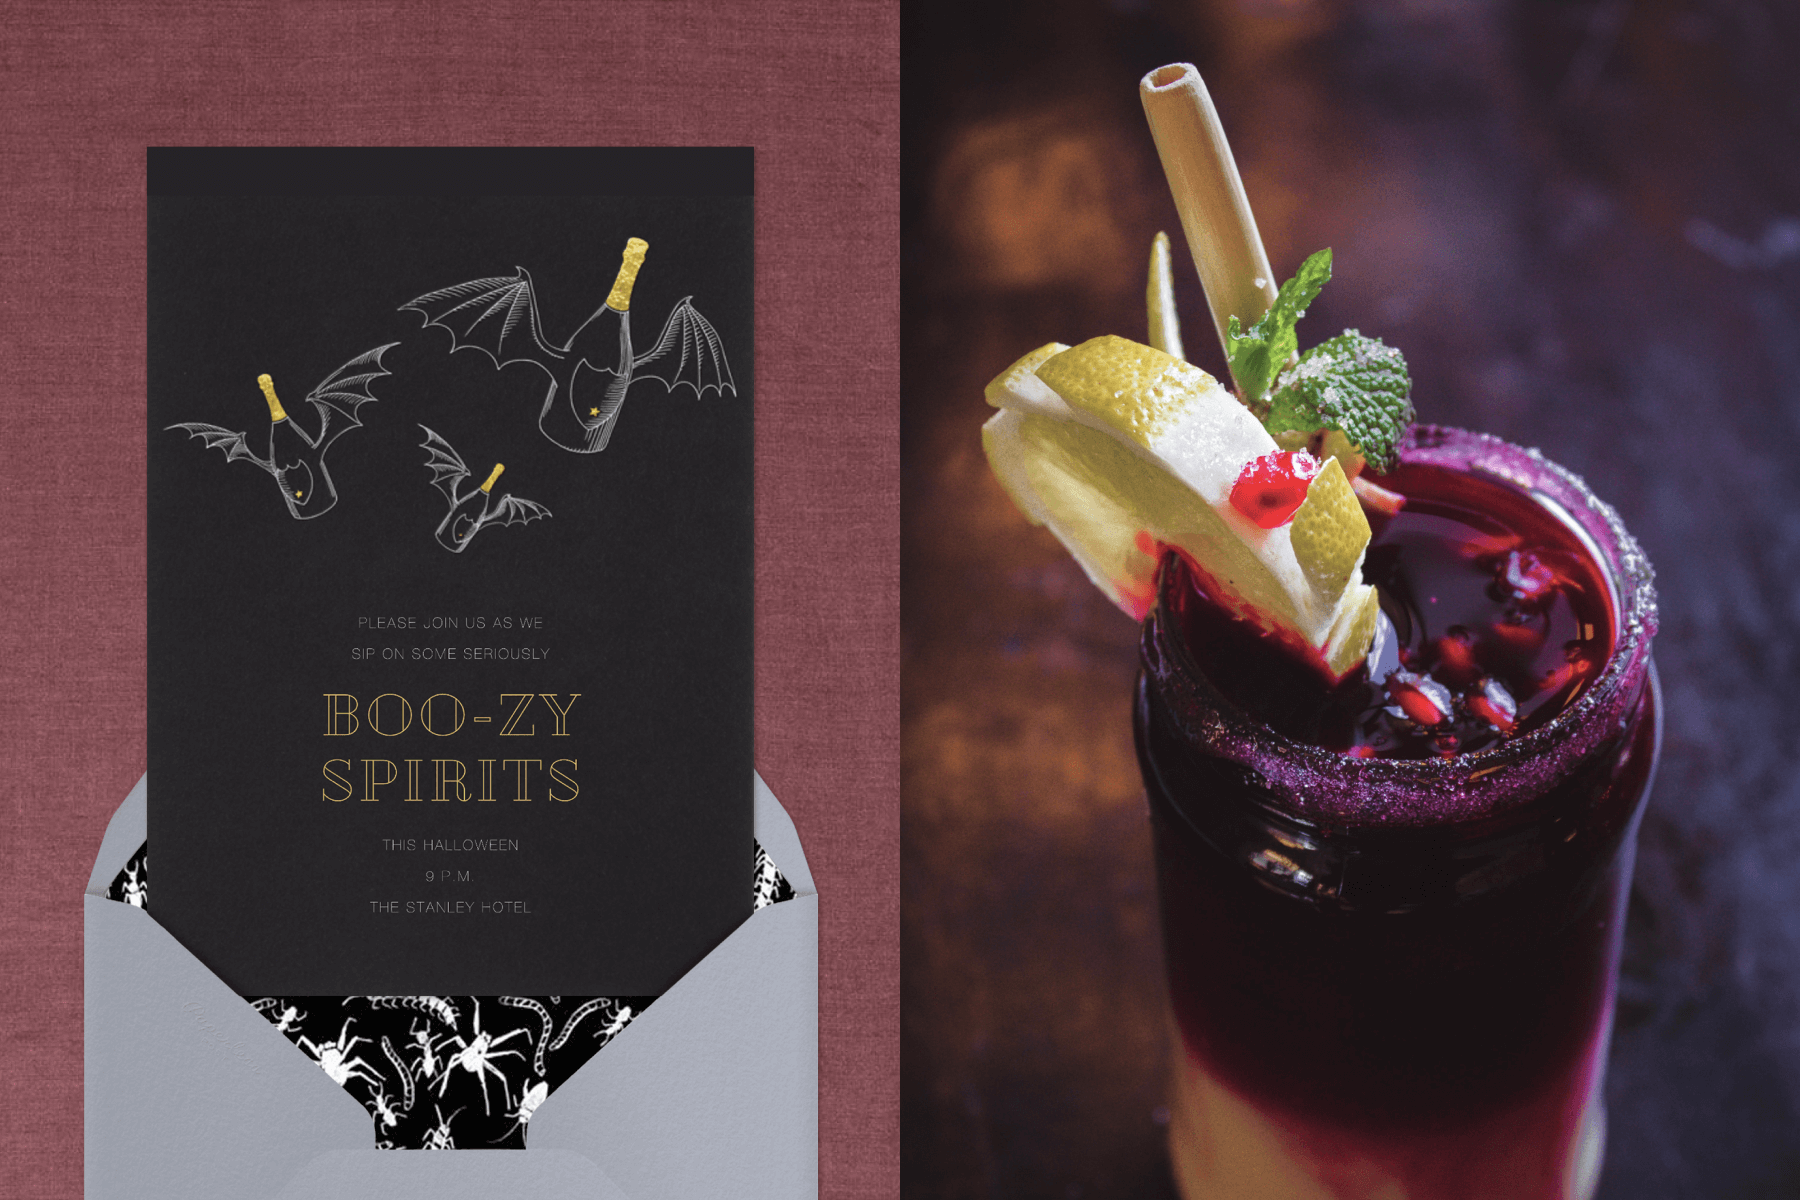 Left: A black Halloween invitation featuring an illustration of champagne bottles with bat wings; right: A top-down photograph of a Demagorgon’s Dinner cocktail.